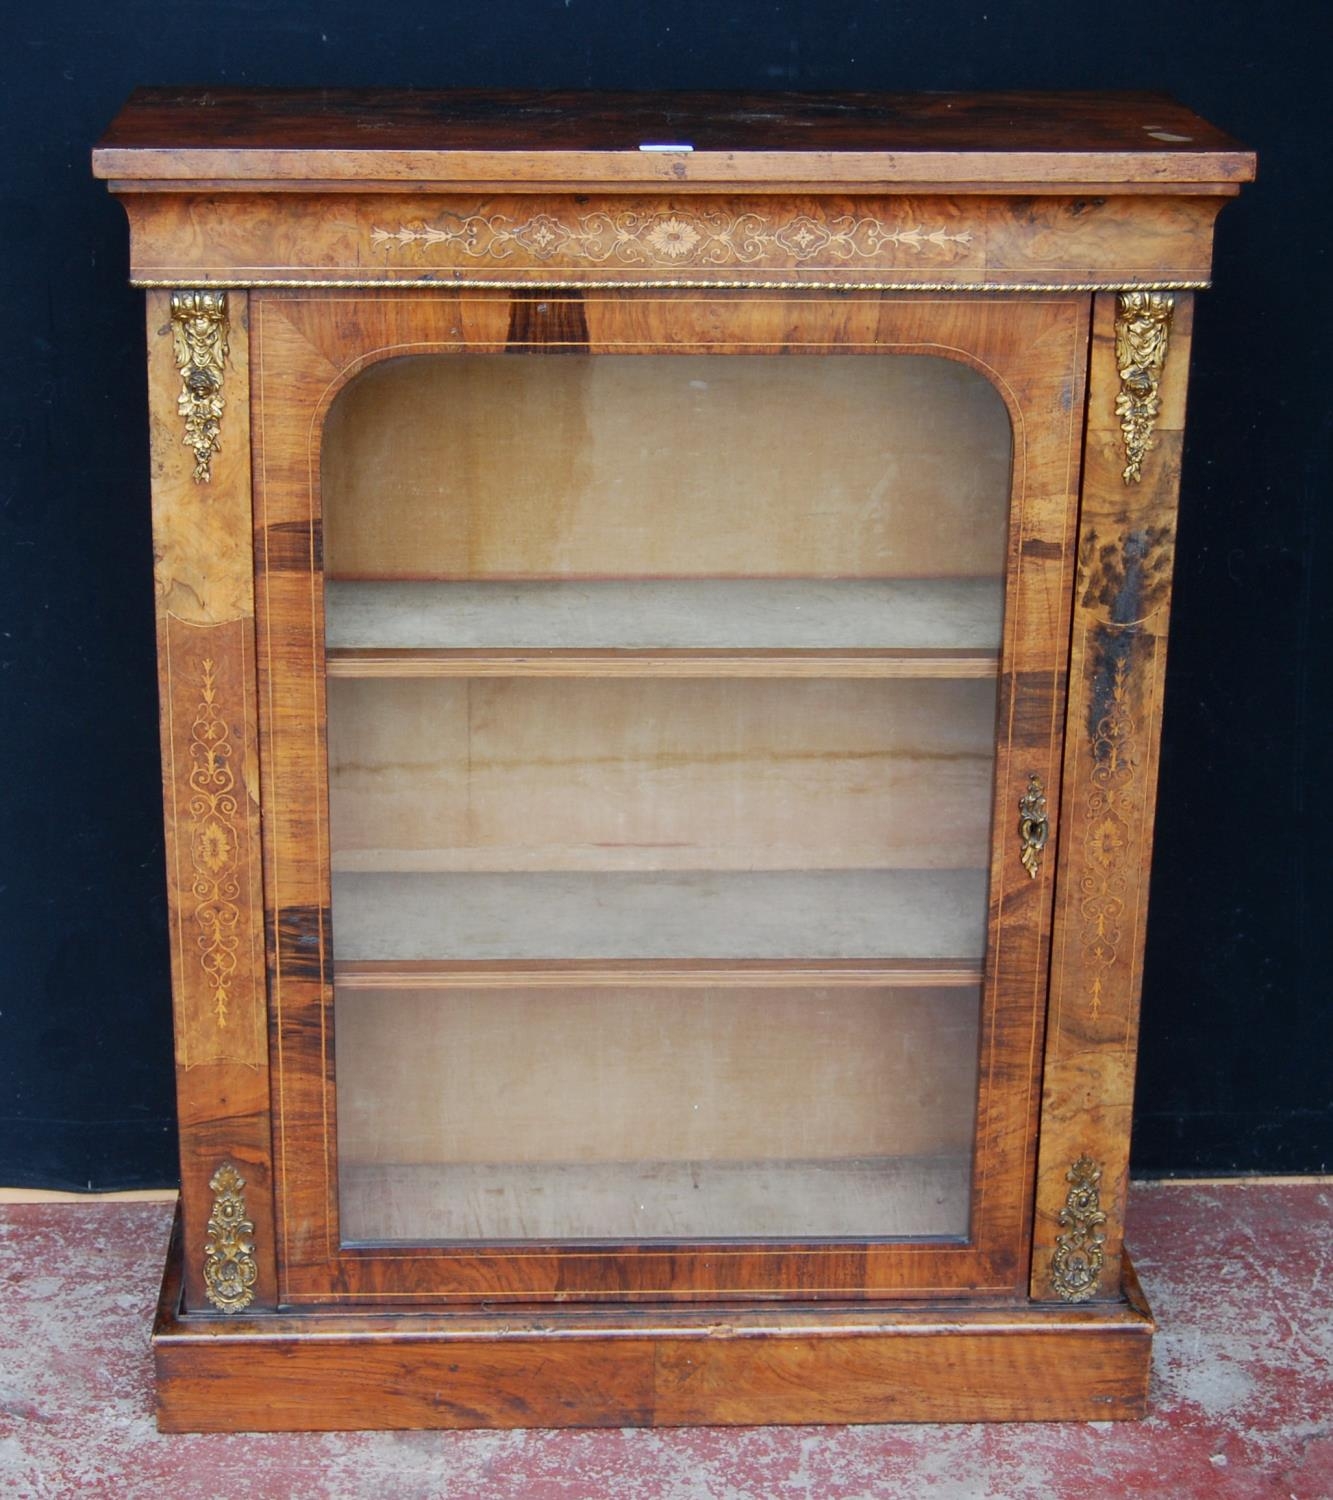 19th century French inlaid burr walnut pier cabinet, the inlaid frieze above a glazed door enclosing